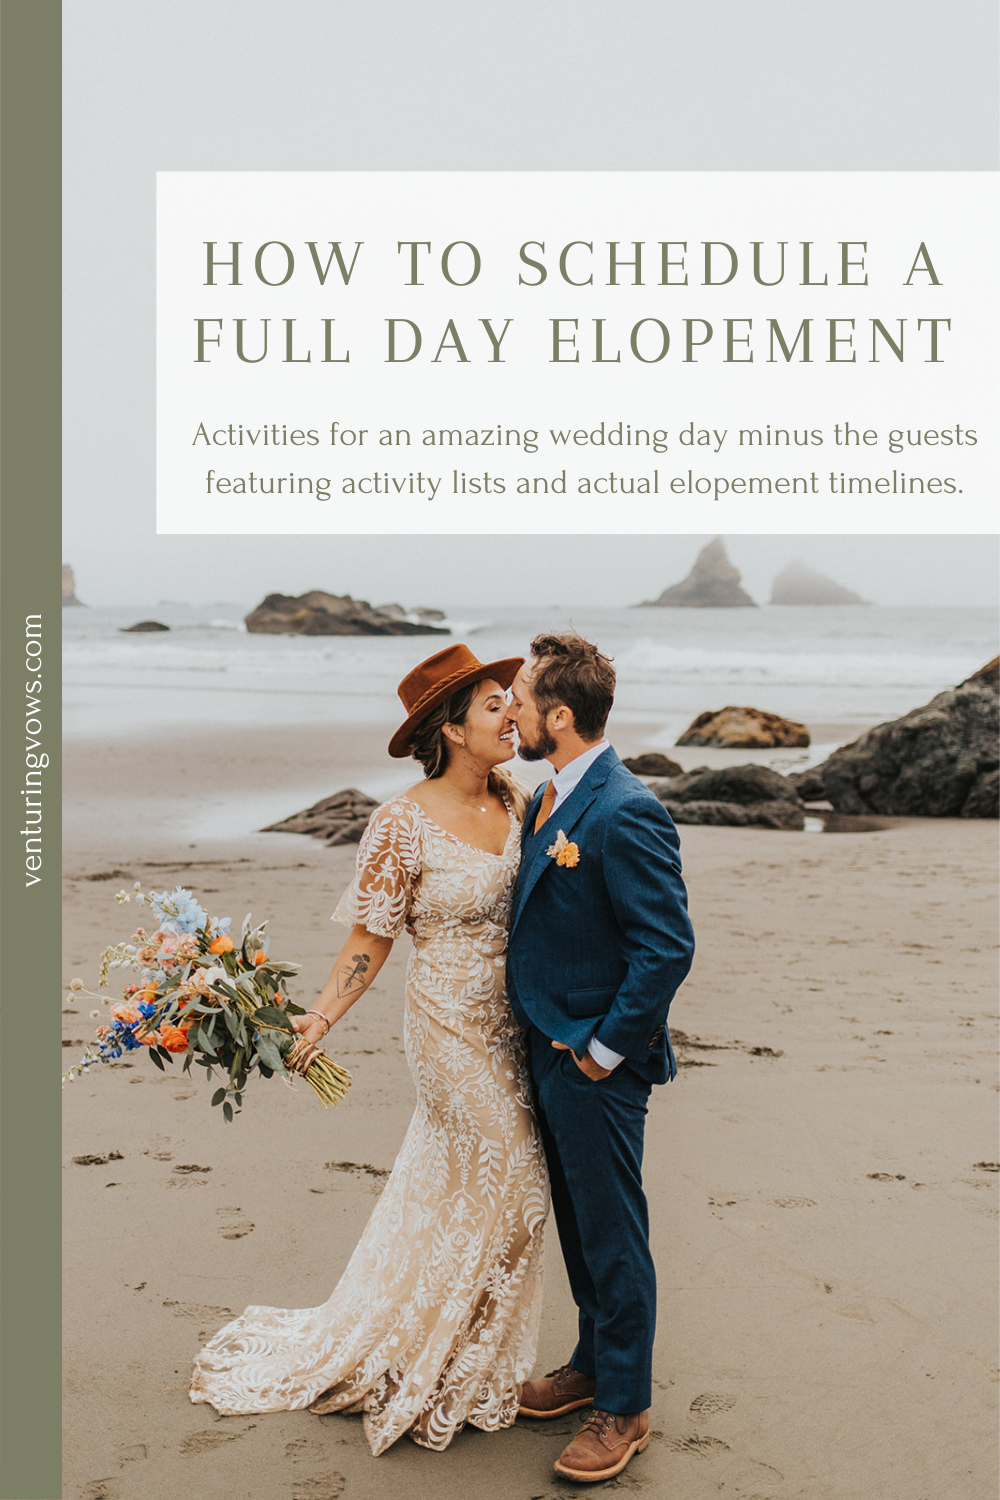 How to schedule a full day elopement